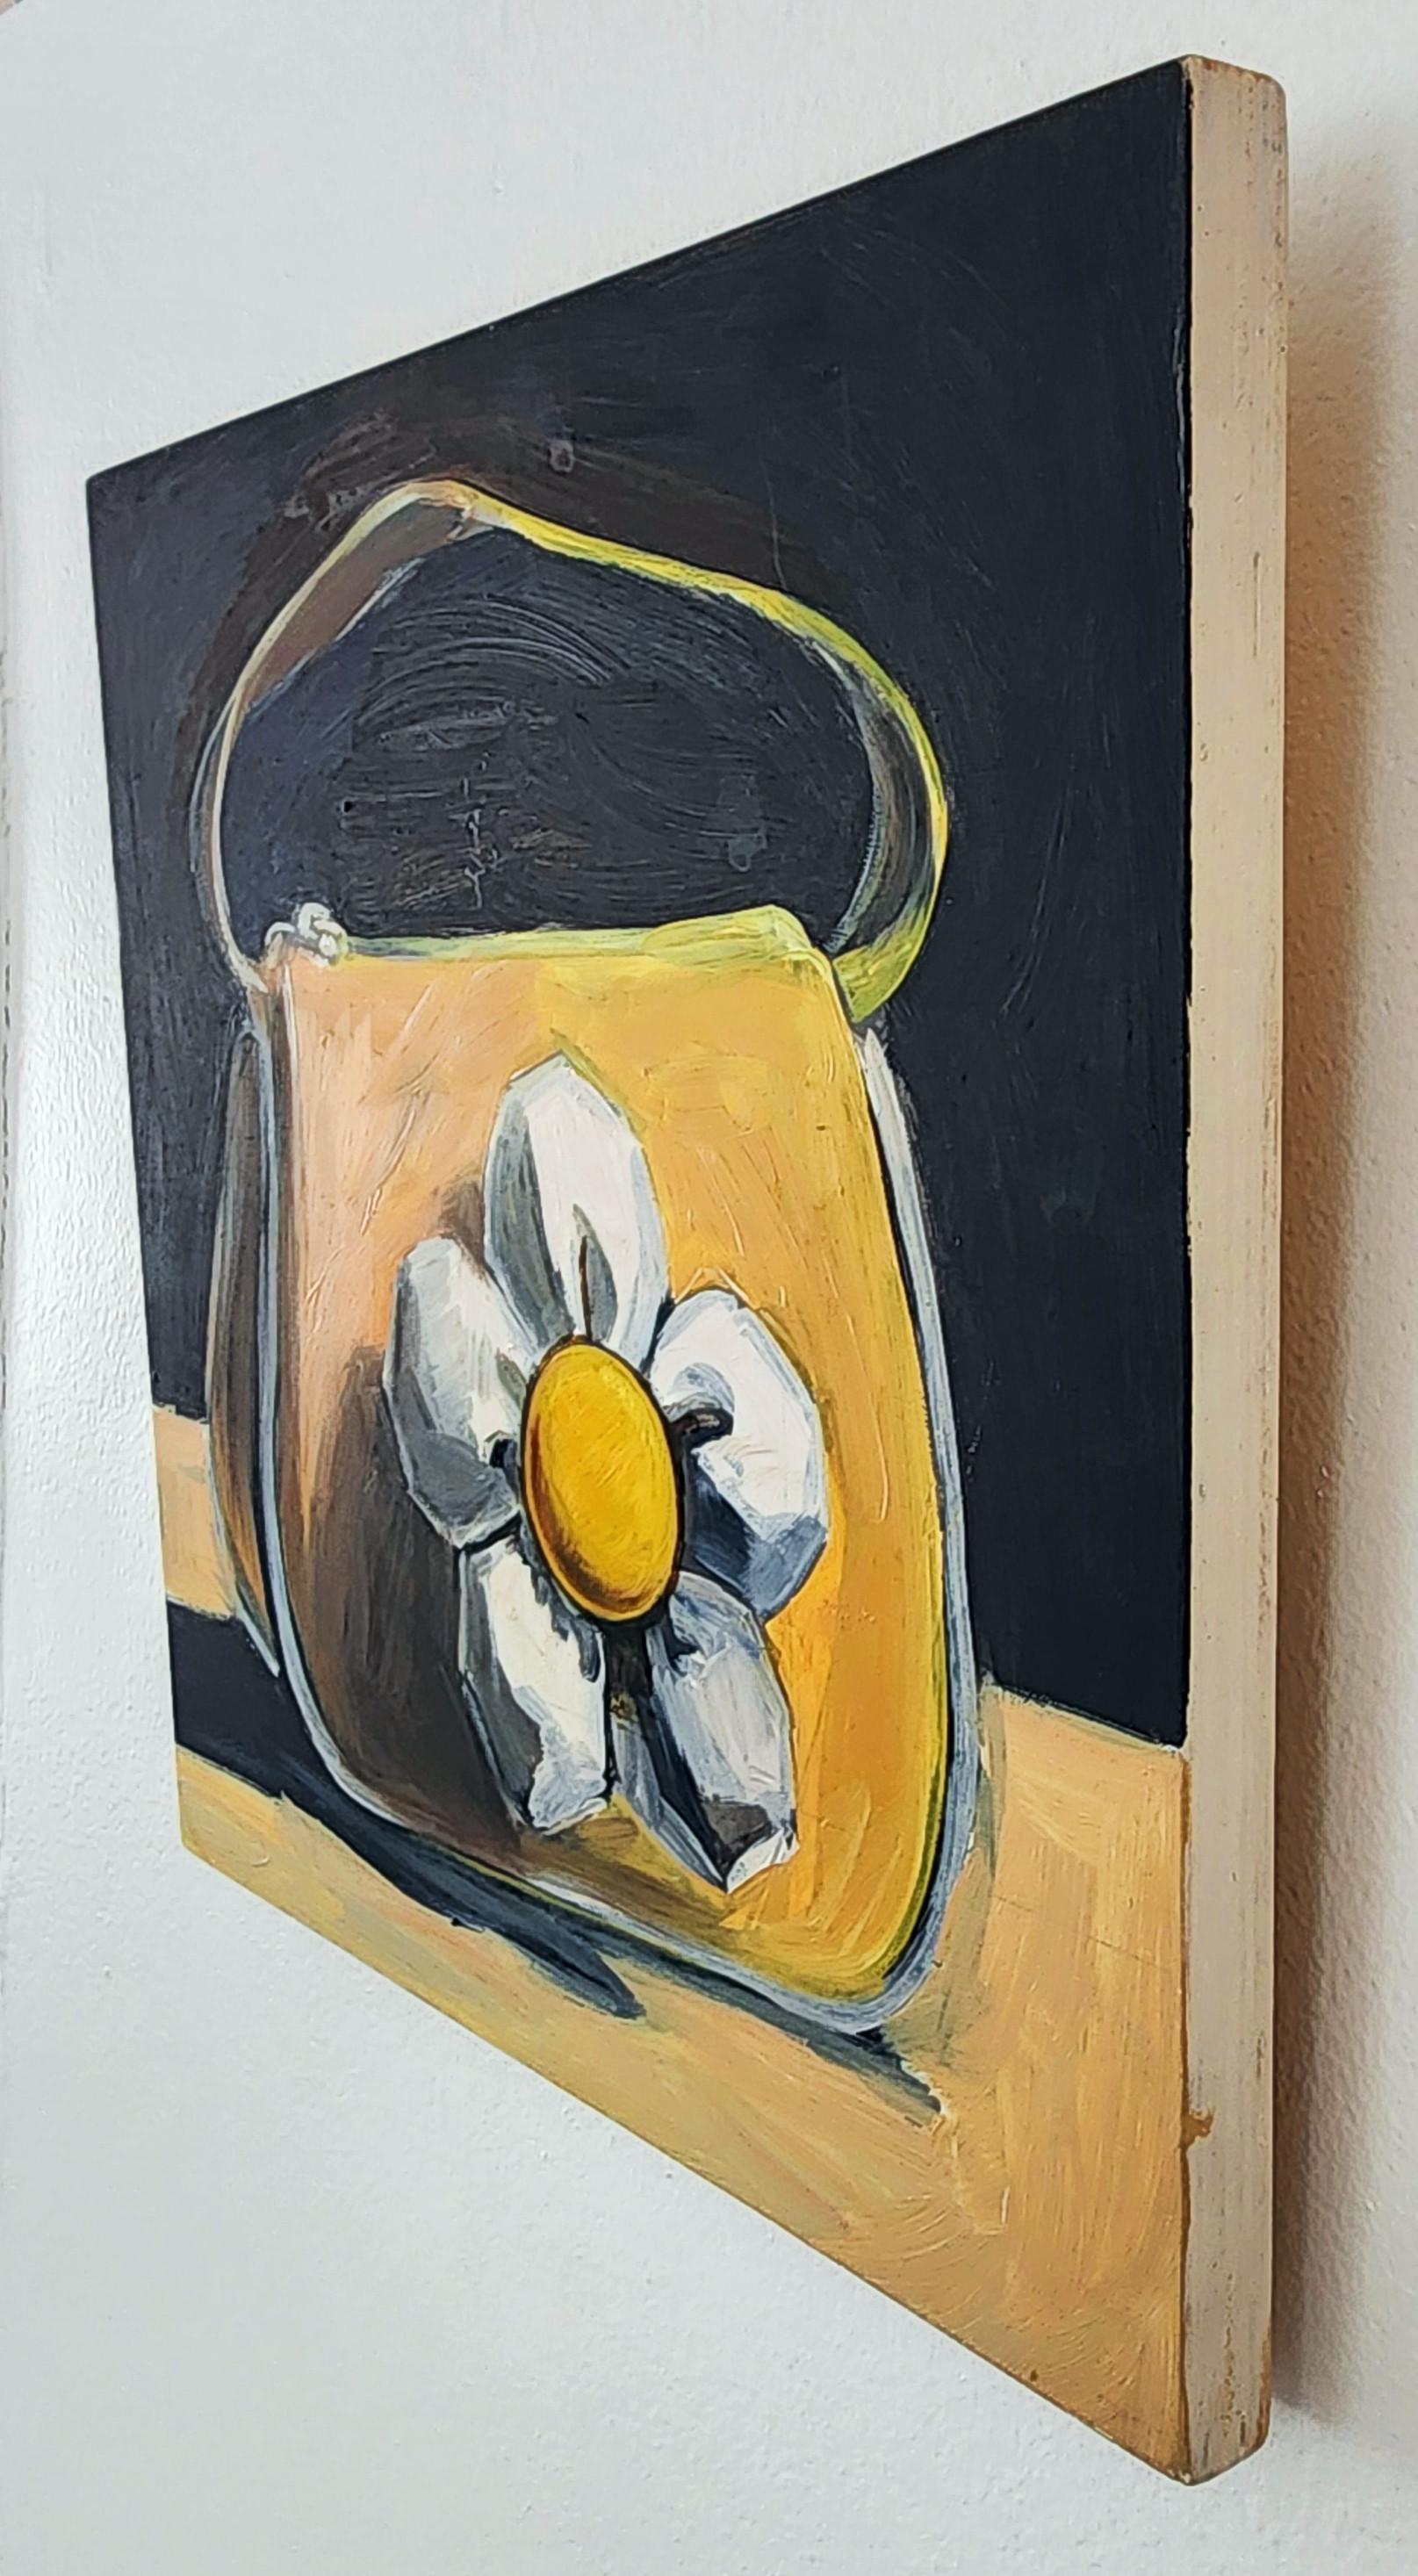 Gregory Eltringham
Flower Handbag
Acrylic on Panel
Year: 2005
Size: 12x12.5x1in
Signed and dated by hand
COA provided
Ref.: 924802-1708

Tags: Yellow, Handbag, Flower, Daisy, Black, Modern, Mid-Century 

Gregory Eltringham is a painting professor,